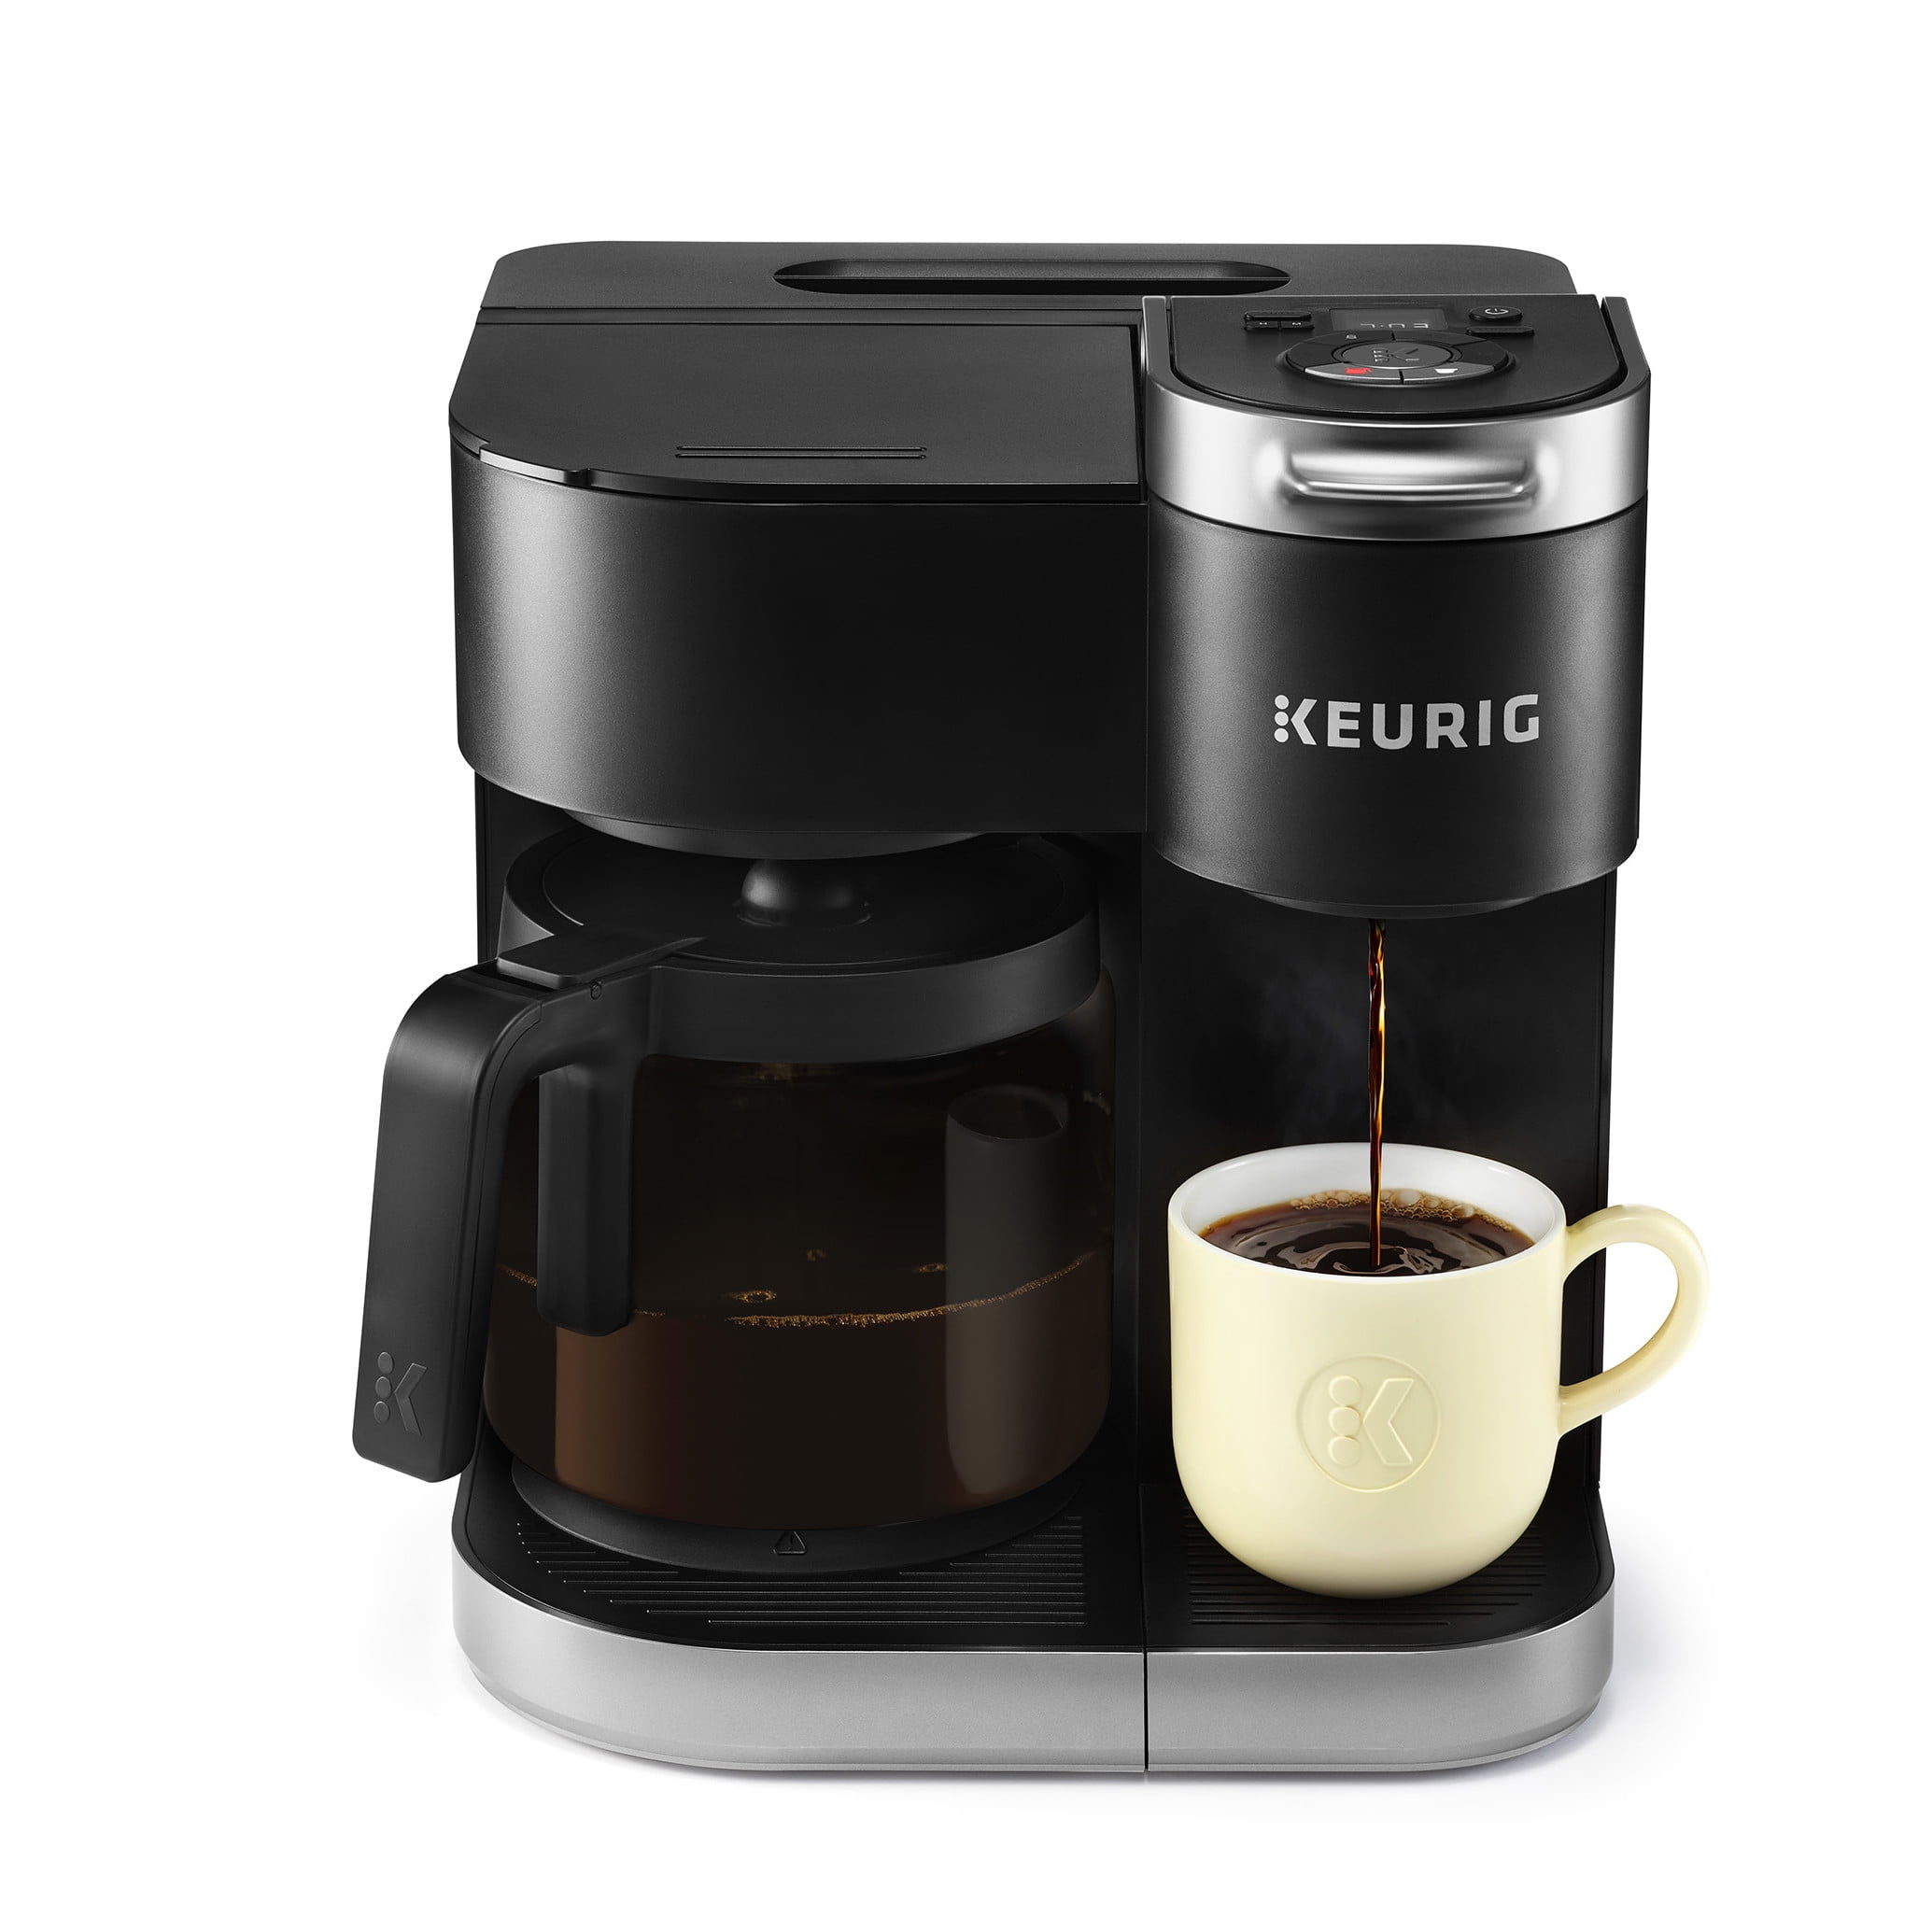 Classic Mini Coffee Pot for Individual Offices Small and Portable Coffee Brewer with Brew Strength Control and Self Cleaning Function Coffee Maker Single Serve Coffee Machine for K Cup Pod & Ground Coffee Dorms 